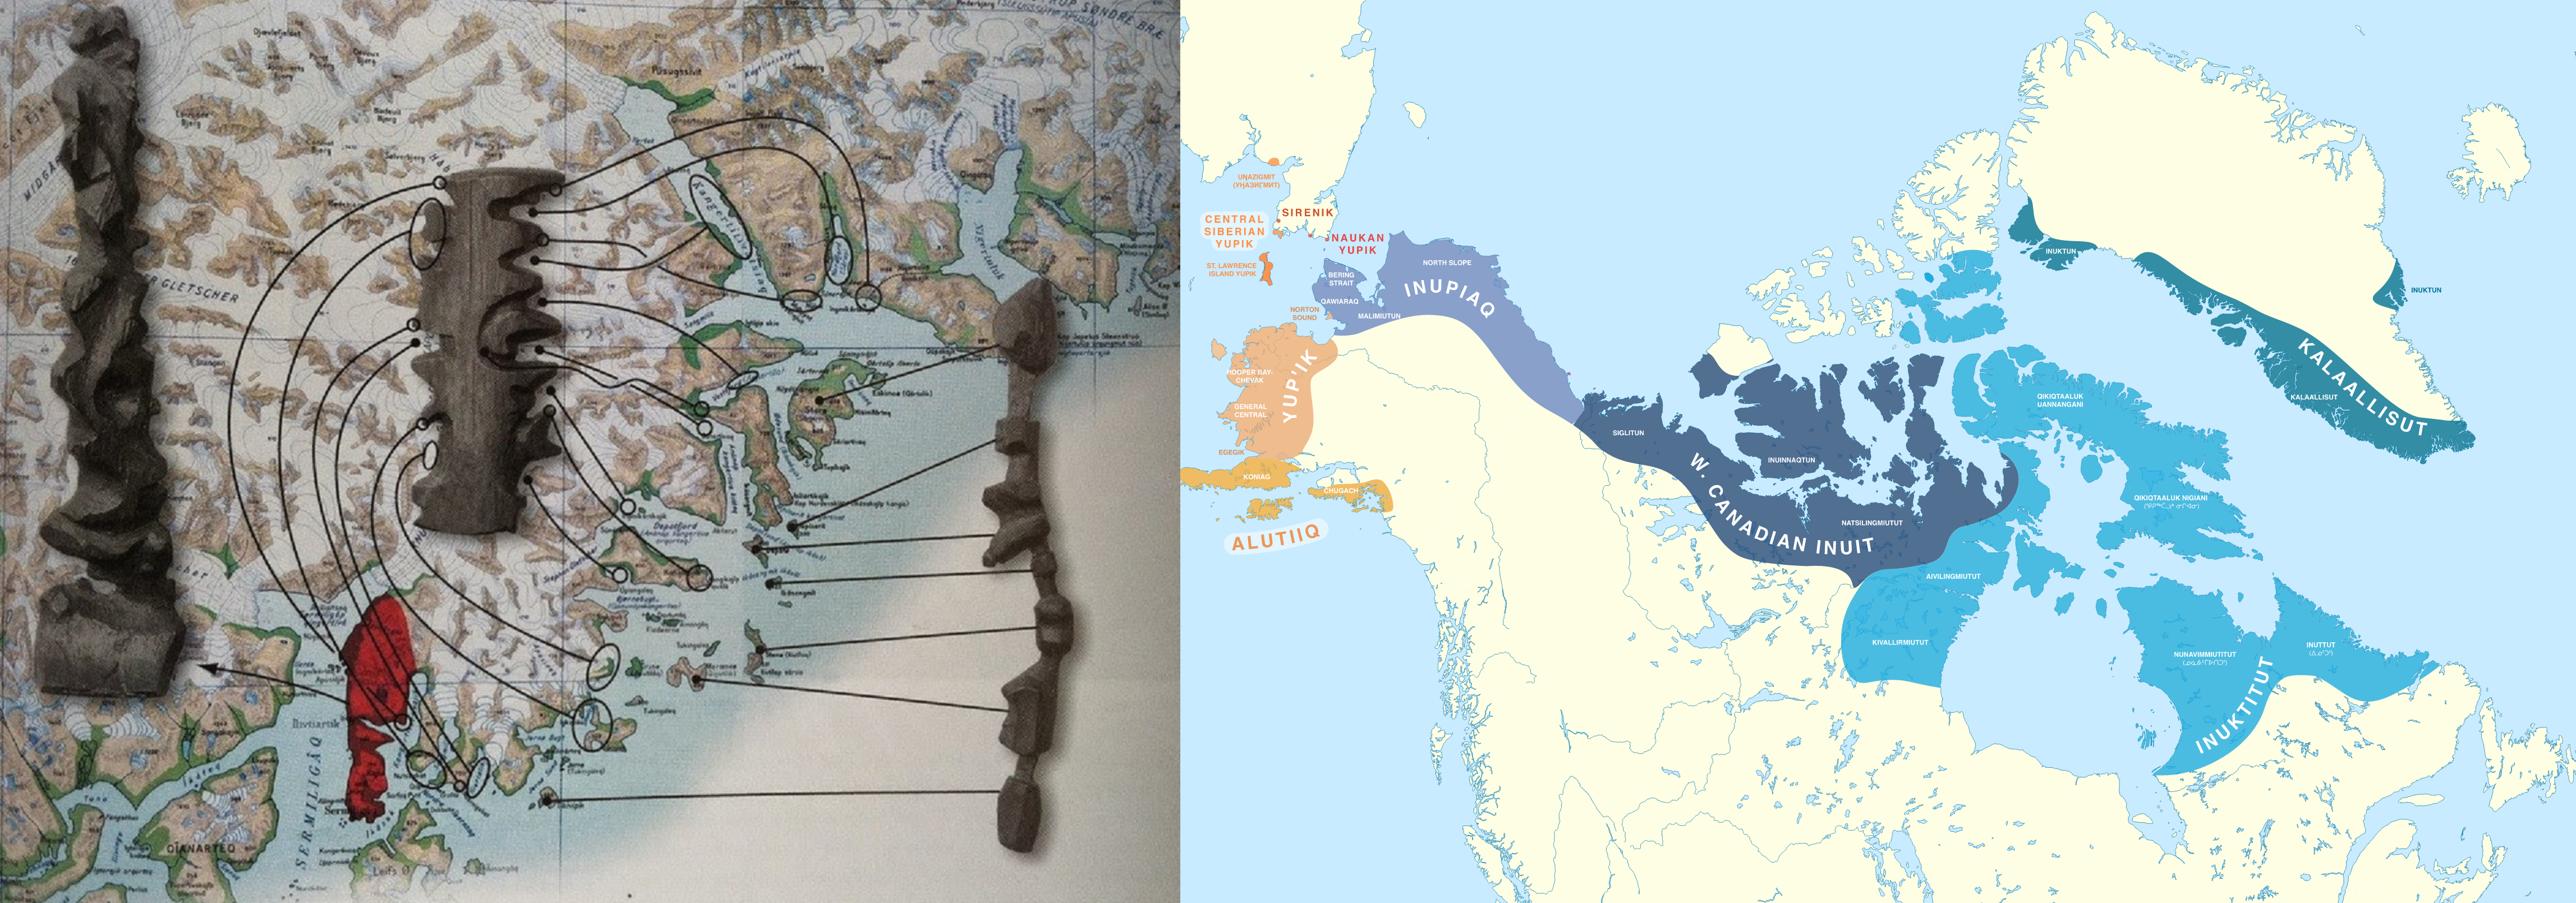 Inuit carvings as tactile maps and the Inuit territory in the Arctic